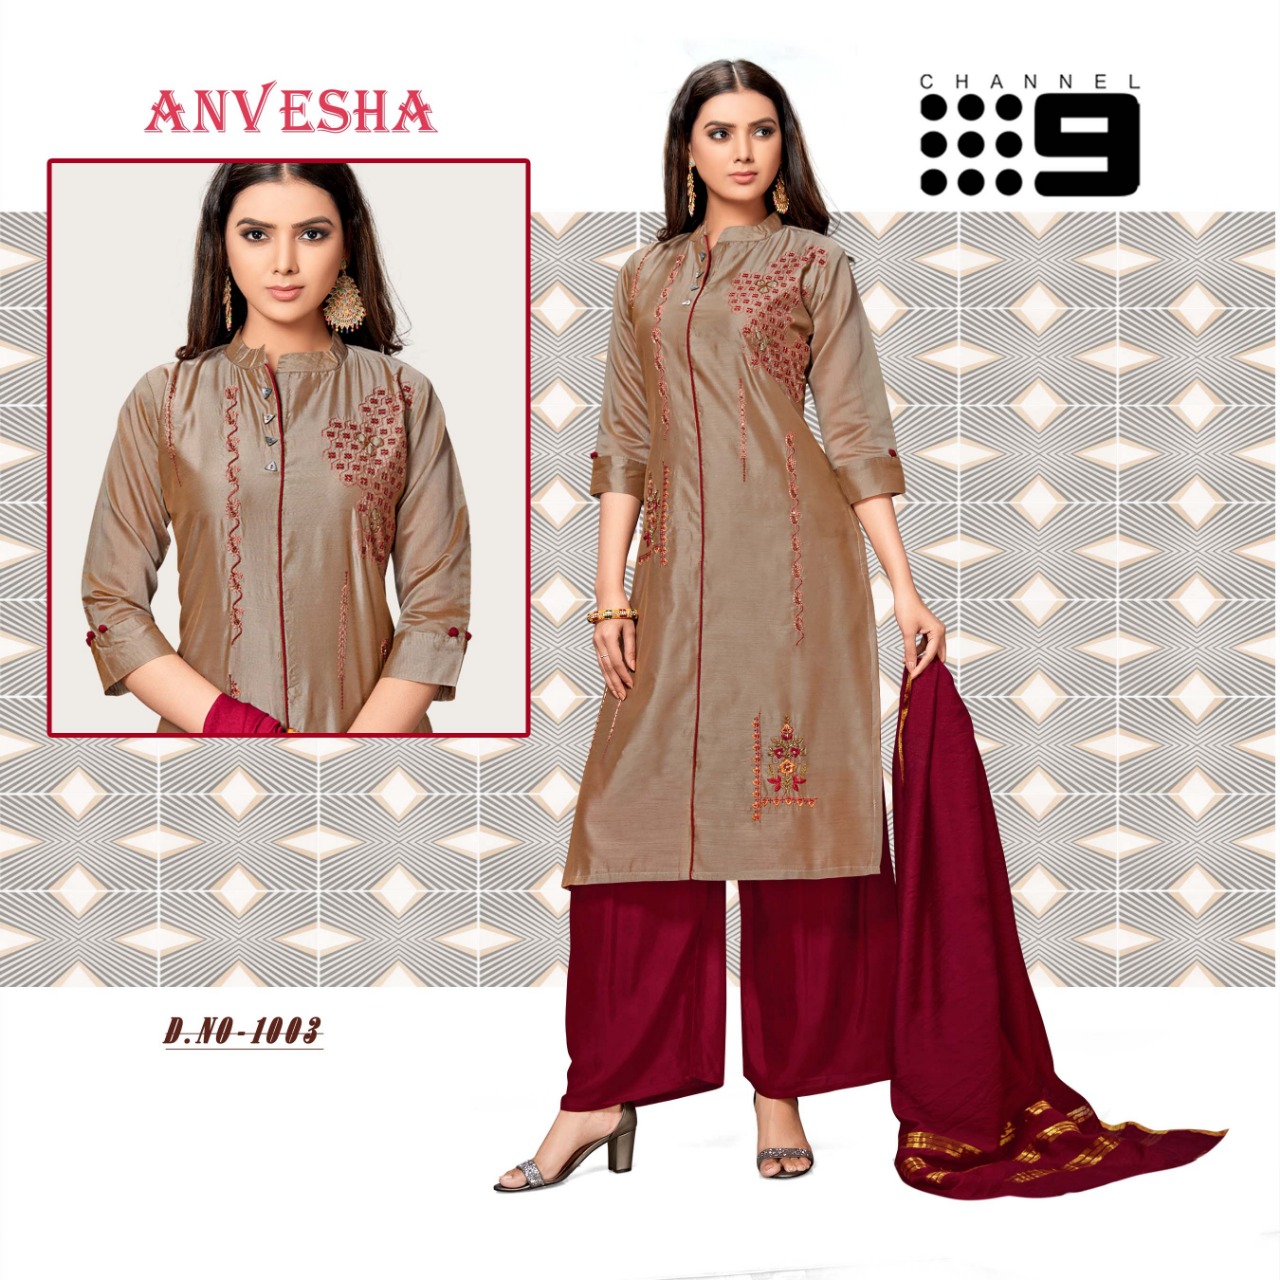 Channel 9 Anvesha Designer Silk Top With Exclusive Viscose Dupatta And Bottom Wholesale